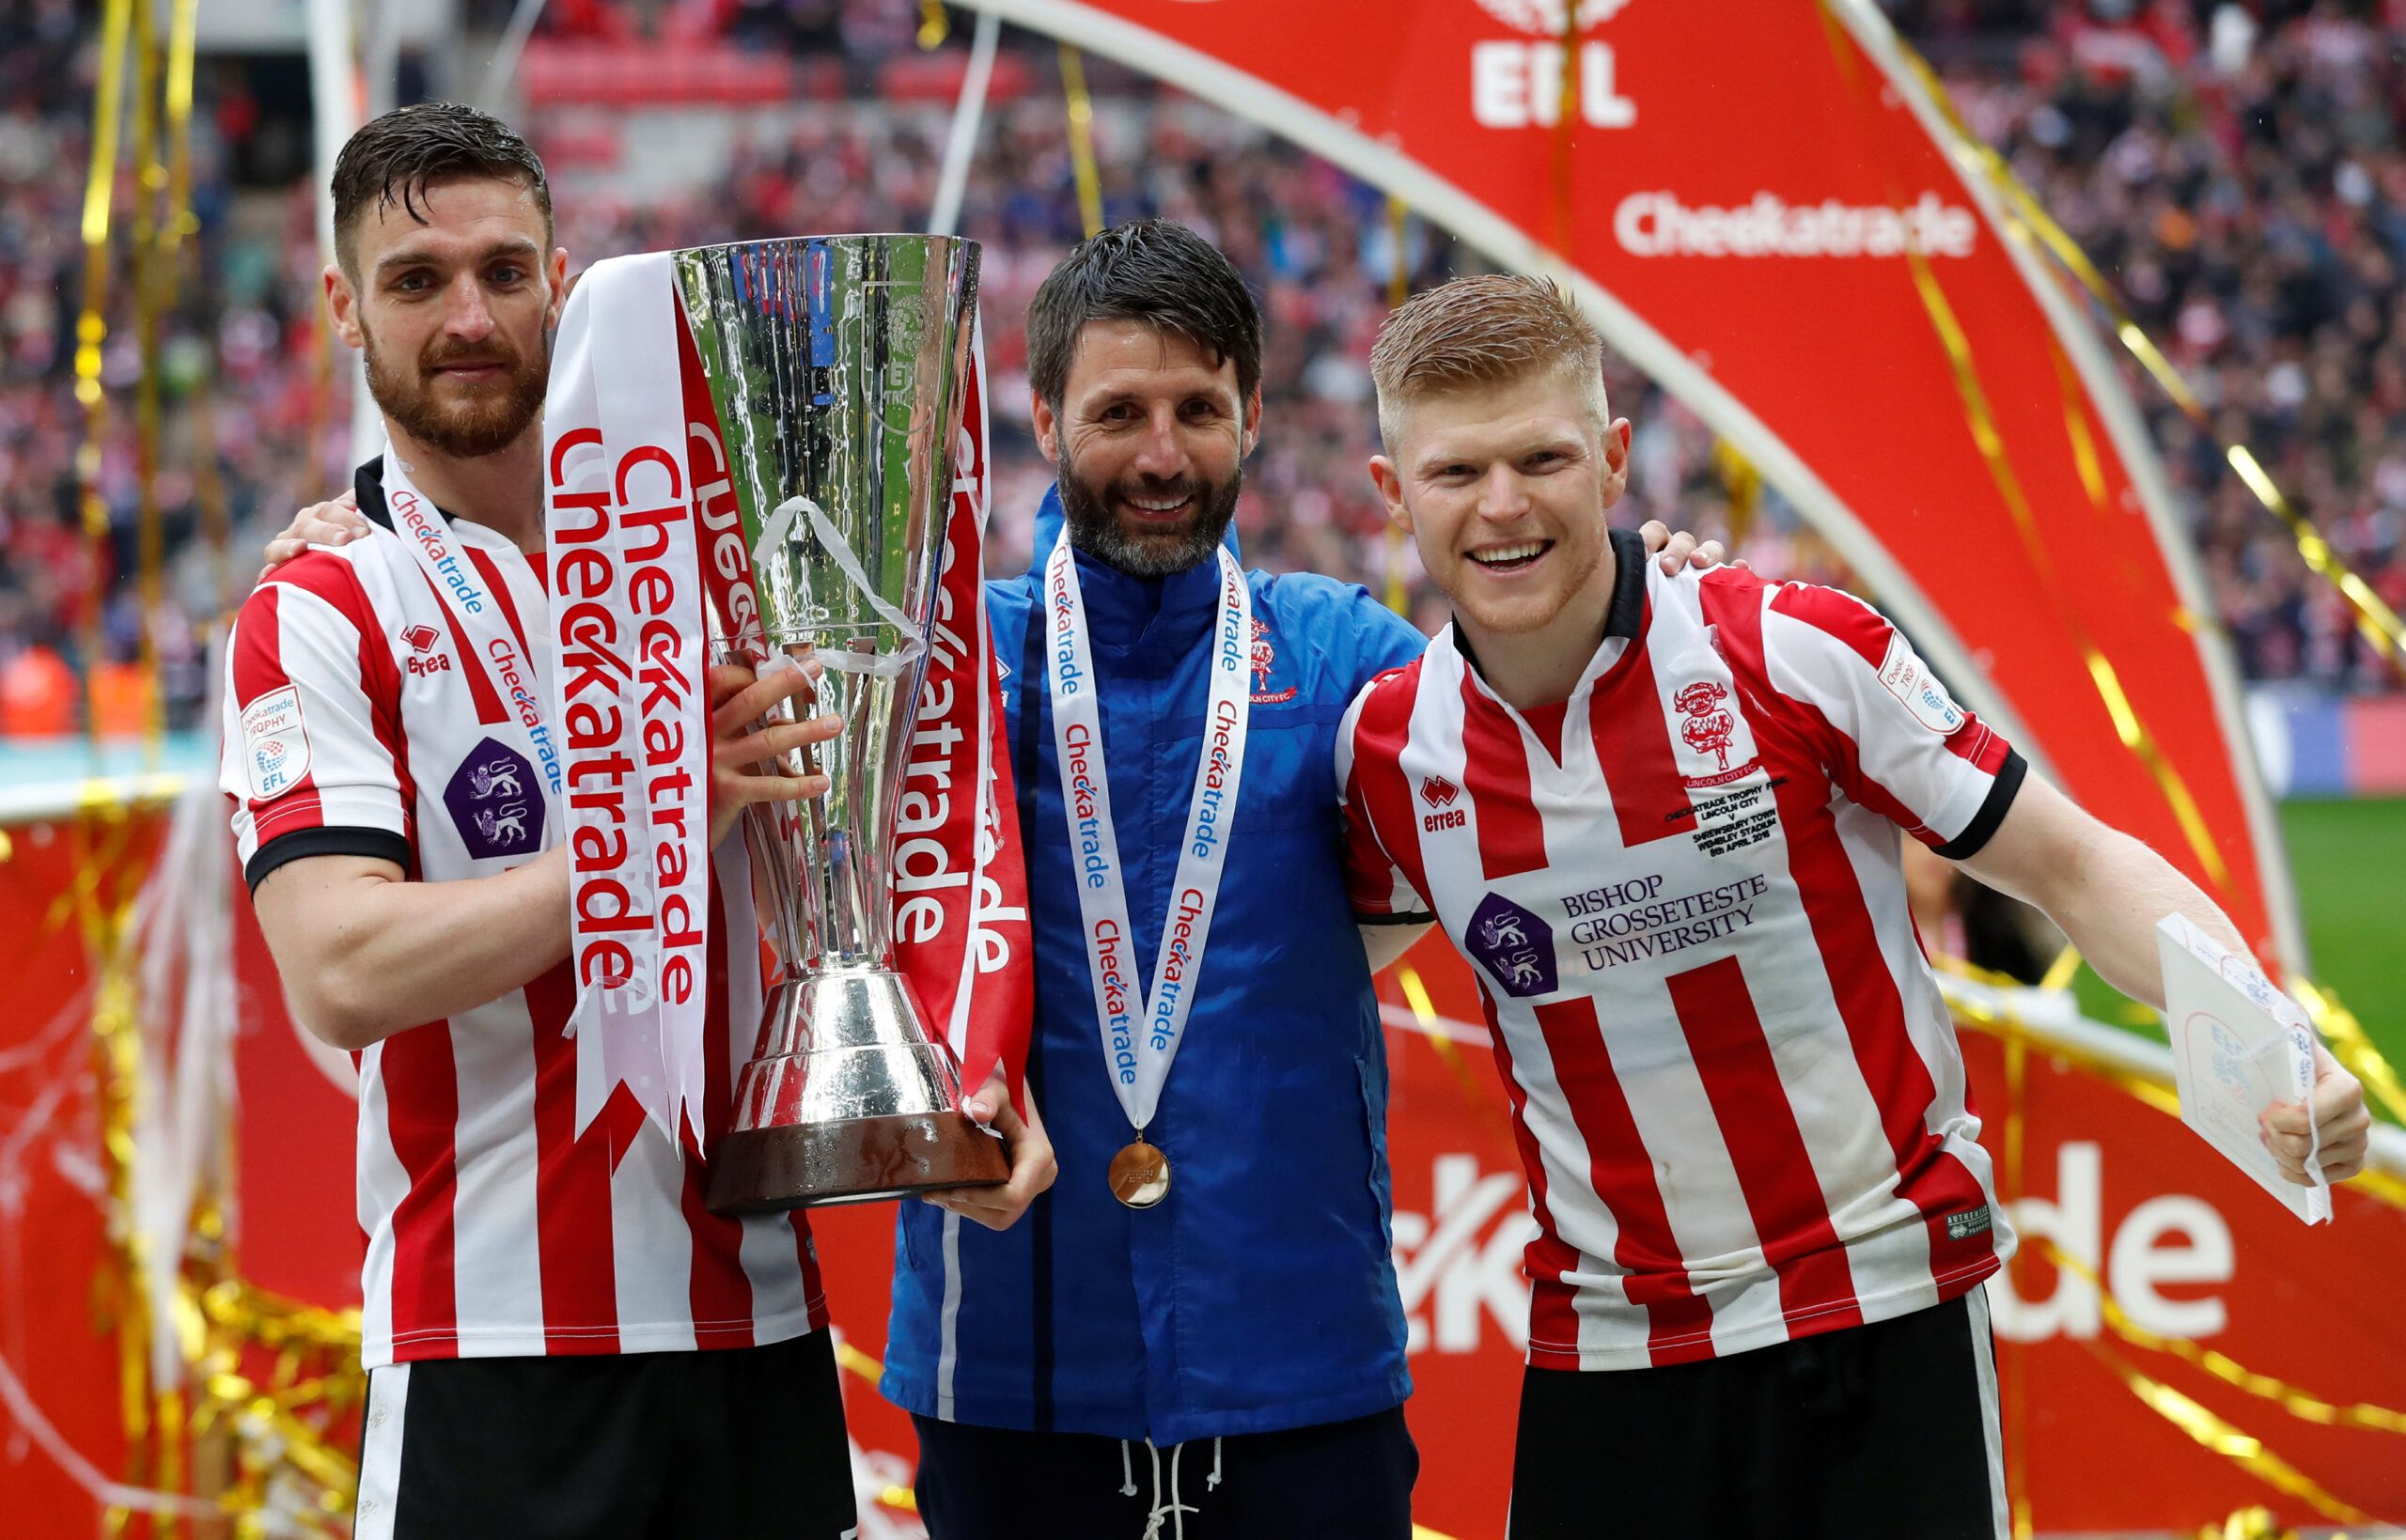 Soccer Football - Checkatrade Trophy Final - Lincoln City vs Shrewsbury Town - Wembley Stadium, London, Britain - April 8, 2018  Lincoln CityÕs Luke Waterfall (L) manager Danny Cowley and Elliot Whitehouse (R) with the trophy   Action Images/Matthew Childs  EDITORIAL USE ONLY. No use with unauthorized audio, video, data, fixture lists, club/league logos or 